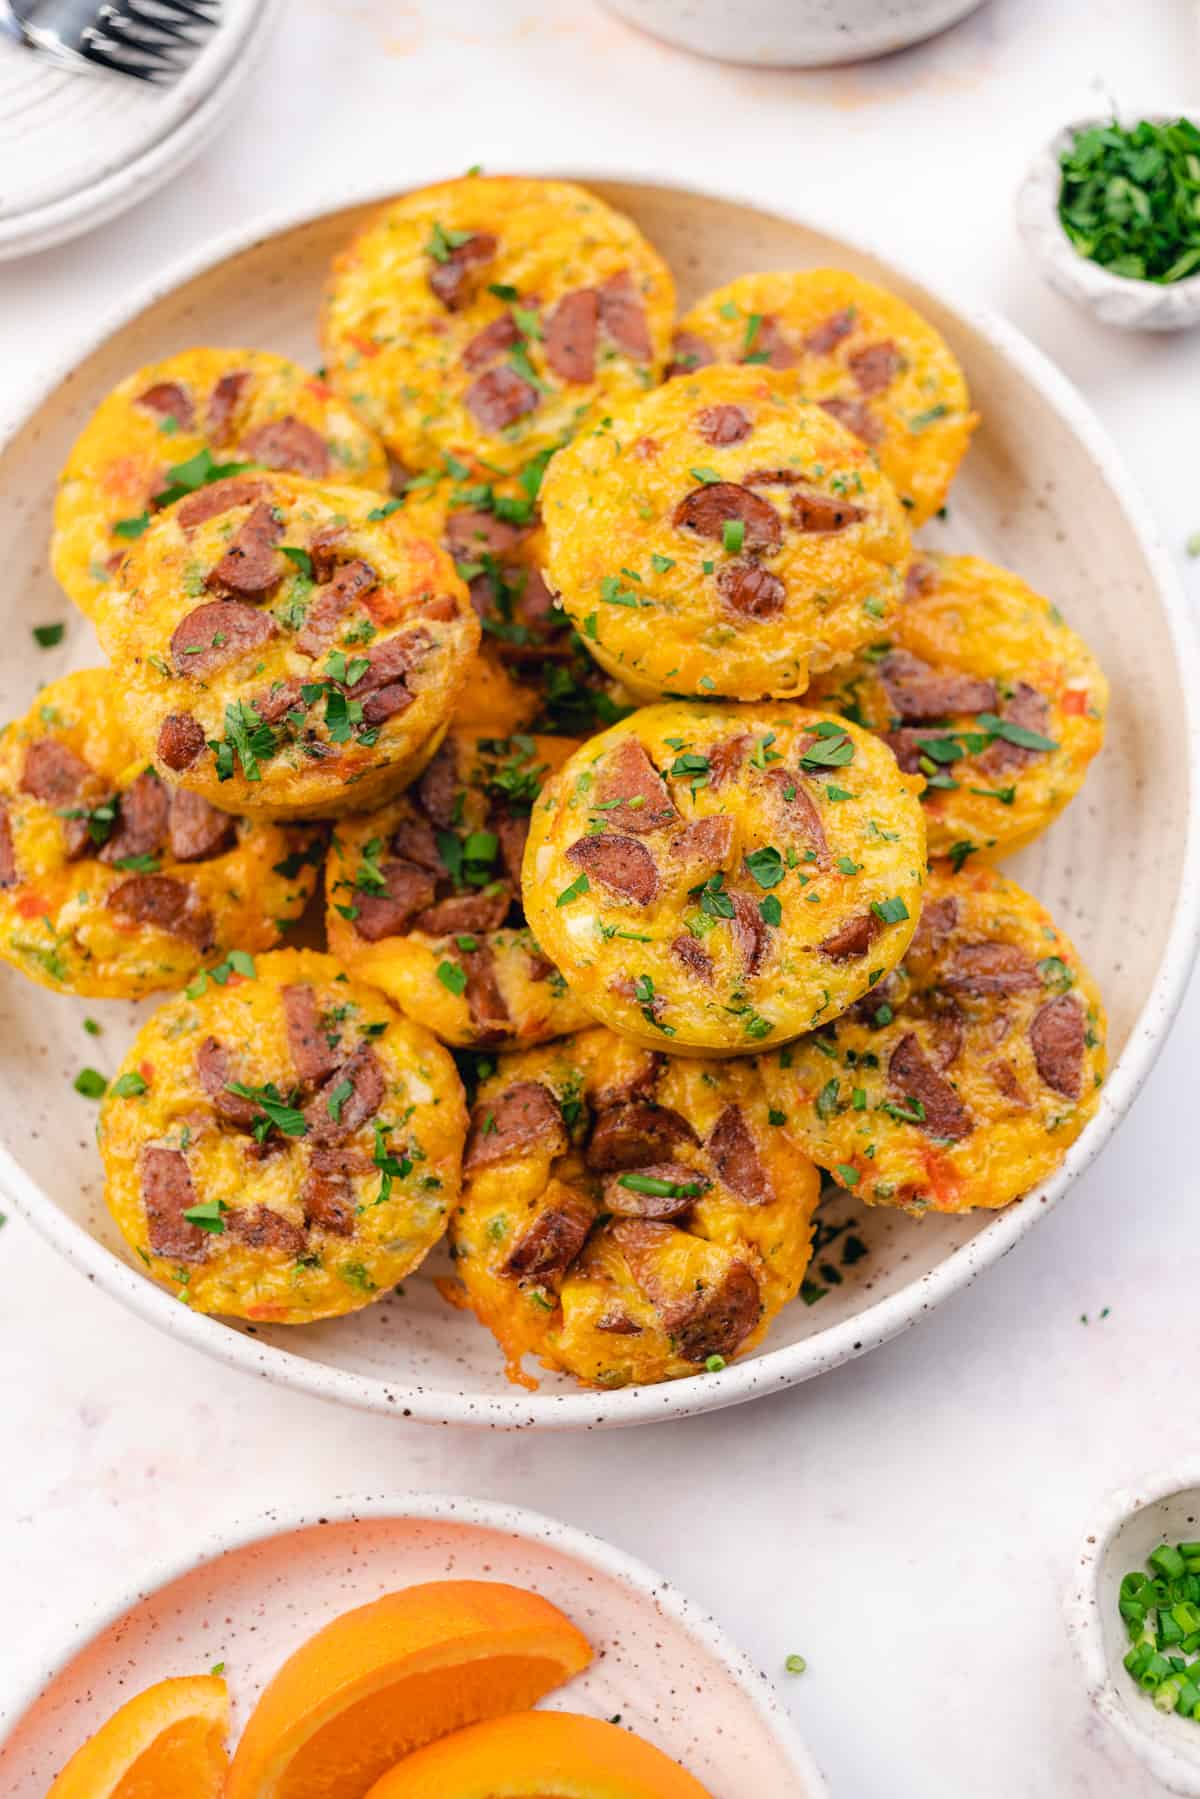 plate of sausage and egg muffins with cheese, bell peppers, chives and parlsey